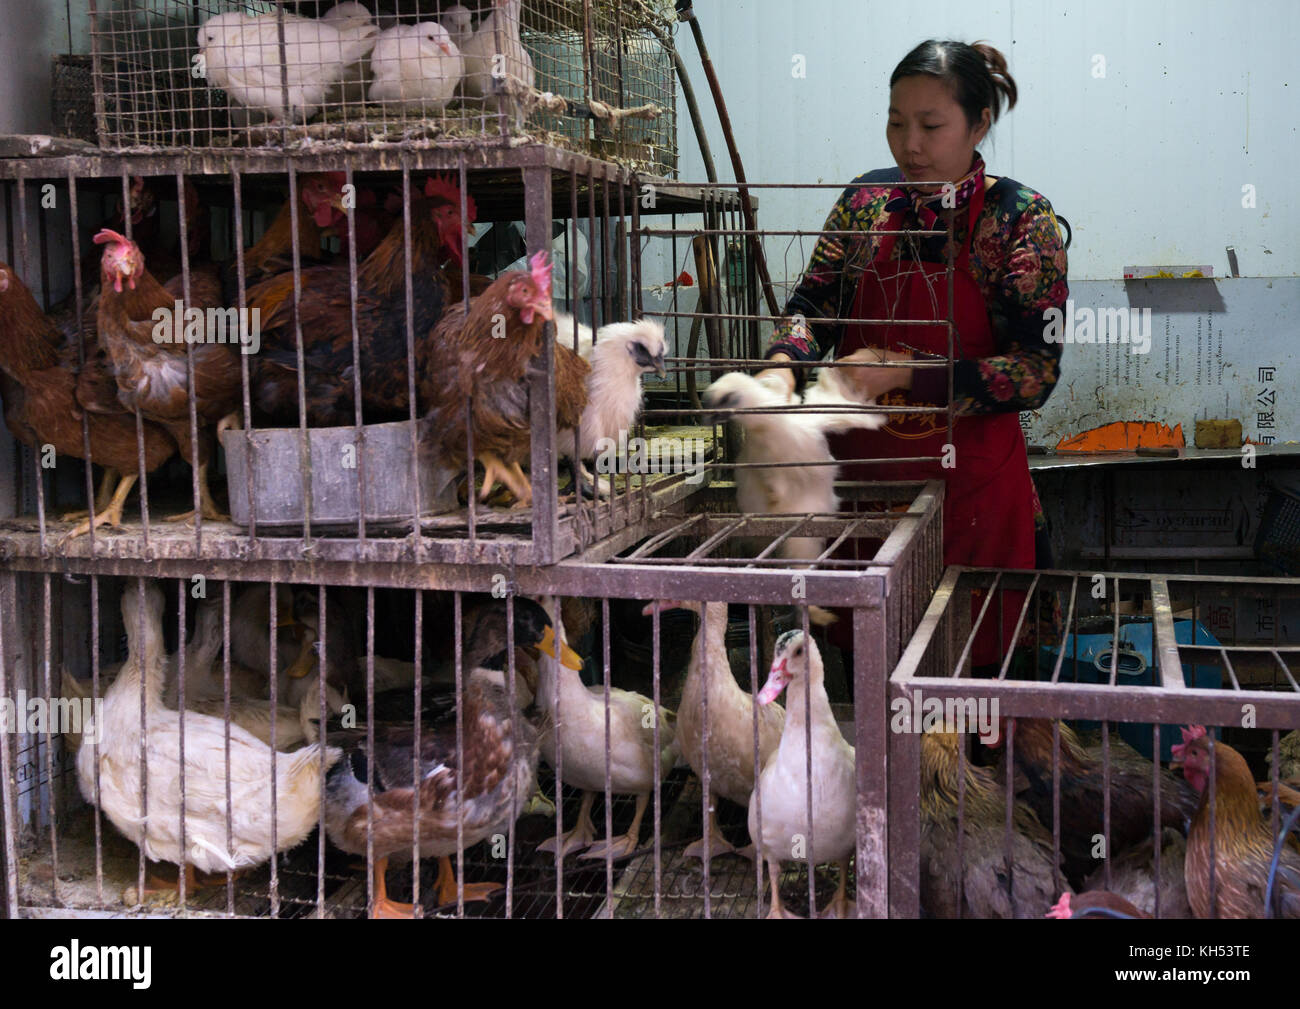 Woman selling live chickens and ducks in cages at a food market, Gansu province, Lanzhou, China Stock Photo